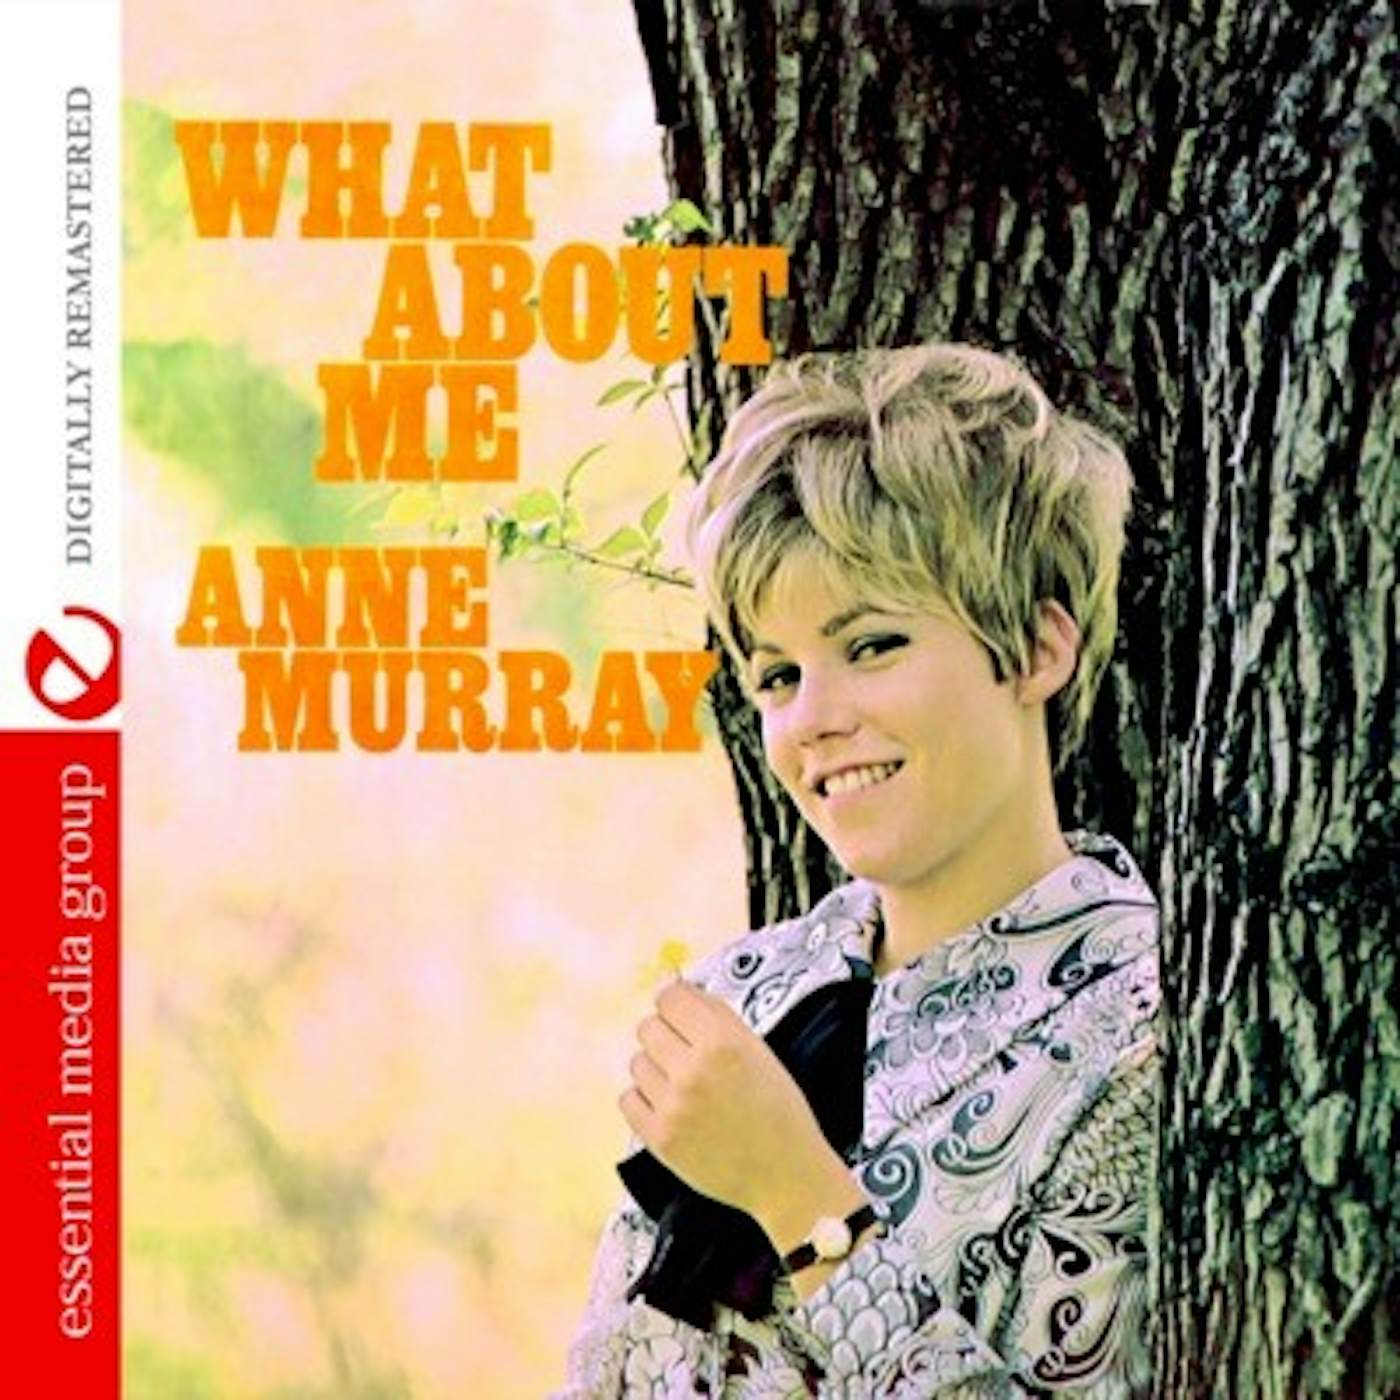 Anne Murray WHAT ABOUT ME CD